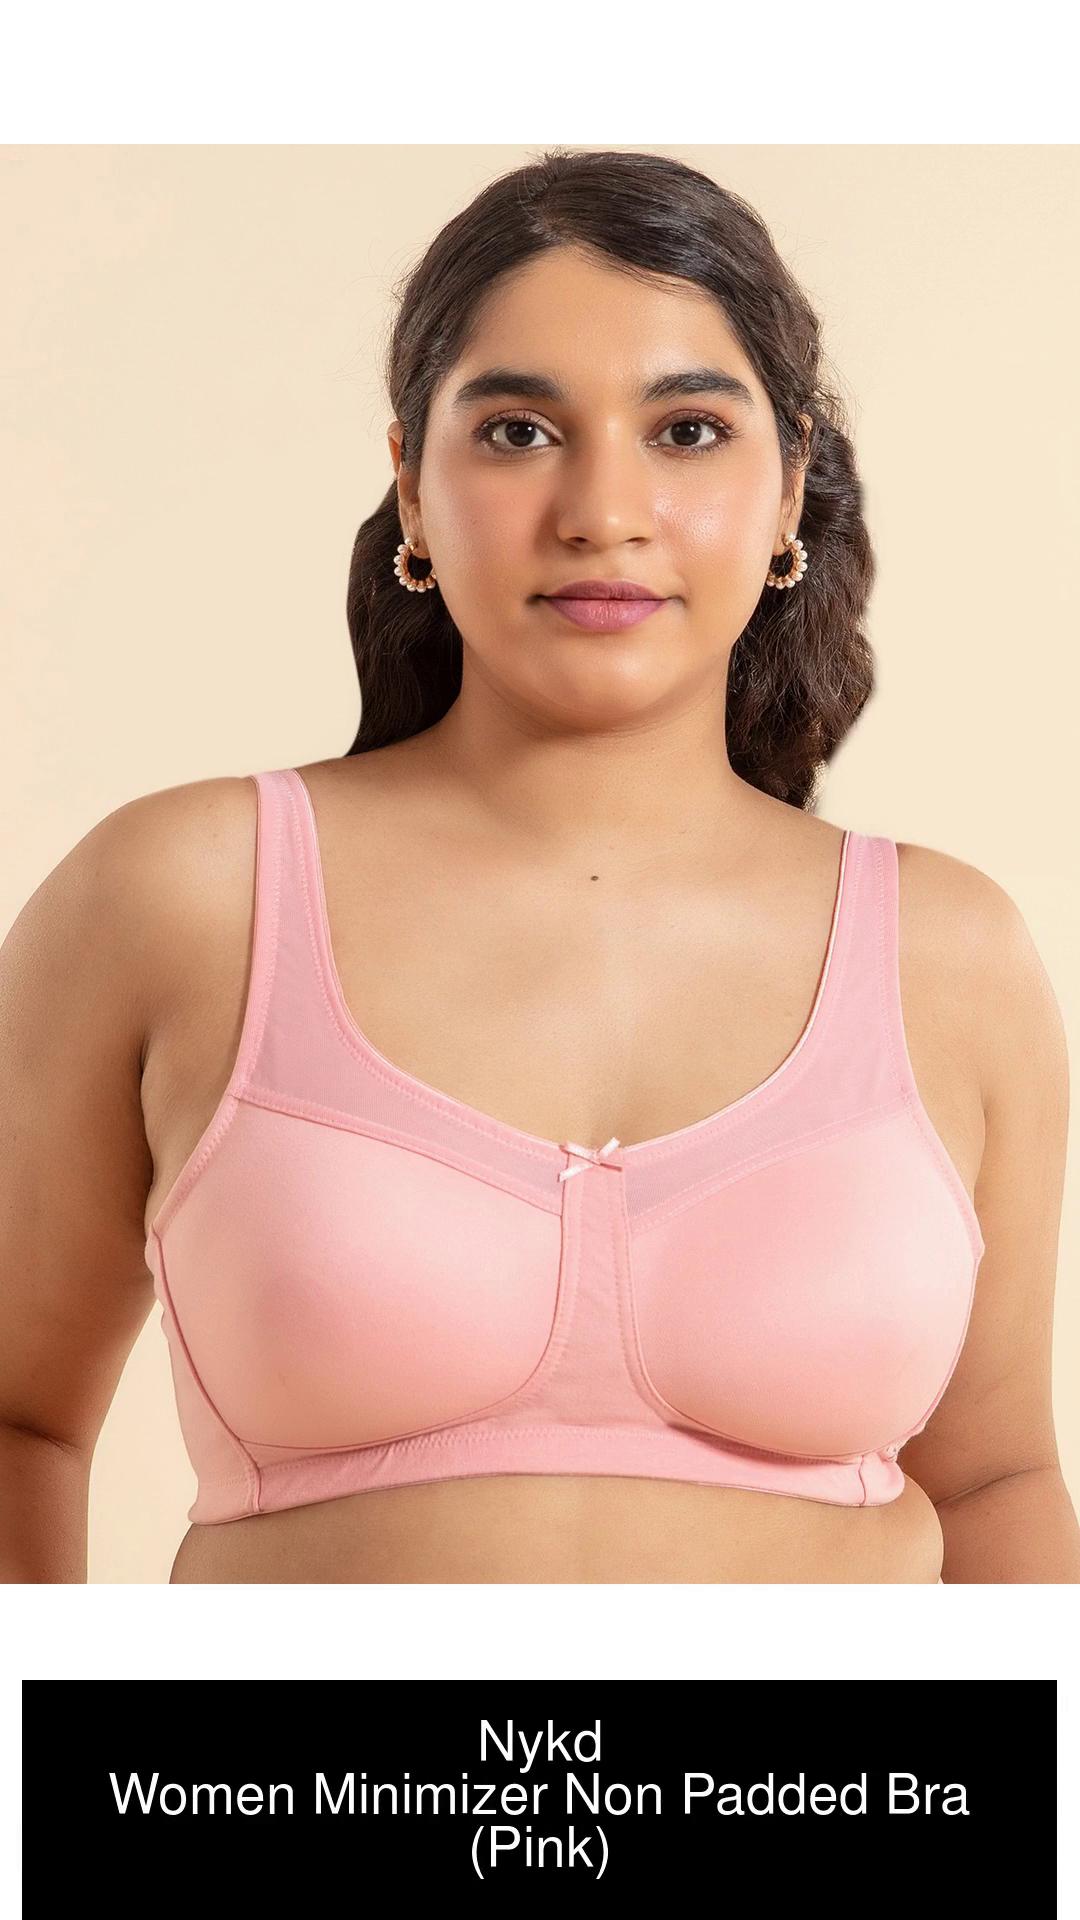 Nykd Everyday Cotton Minimizer Bra for Women Non Padded,Full Coverage, WireFree-NYB189 Women Full Coverage Non Padded Bra - Buy Nykd Everyday  Cotton Minimizer Bra for Women Non Padded,Full Coverage,WireFree-NYB189  Women Full Coverage Non